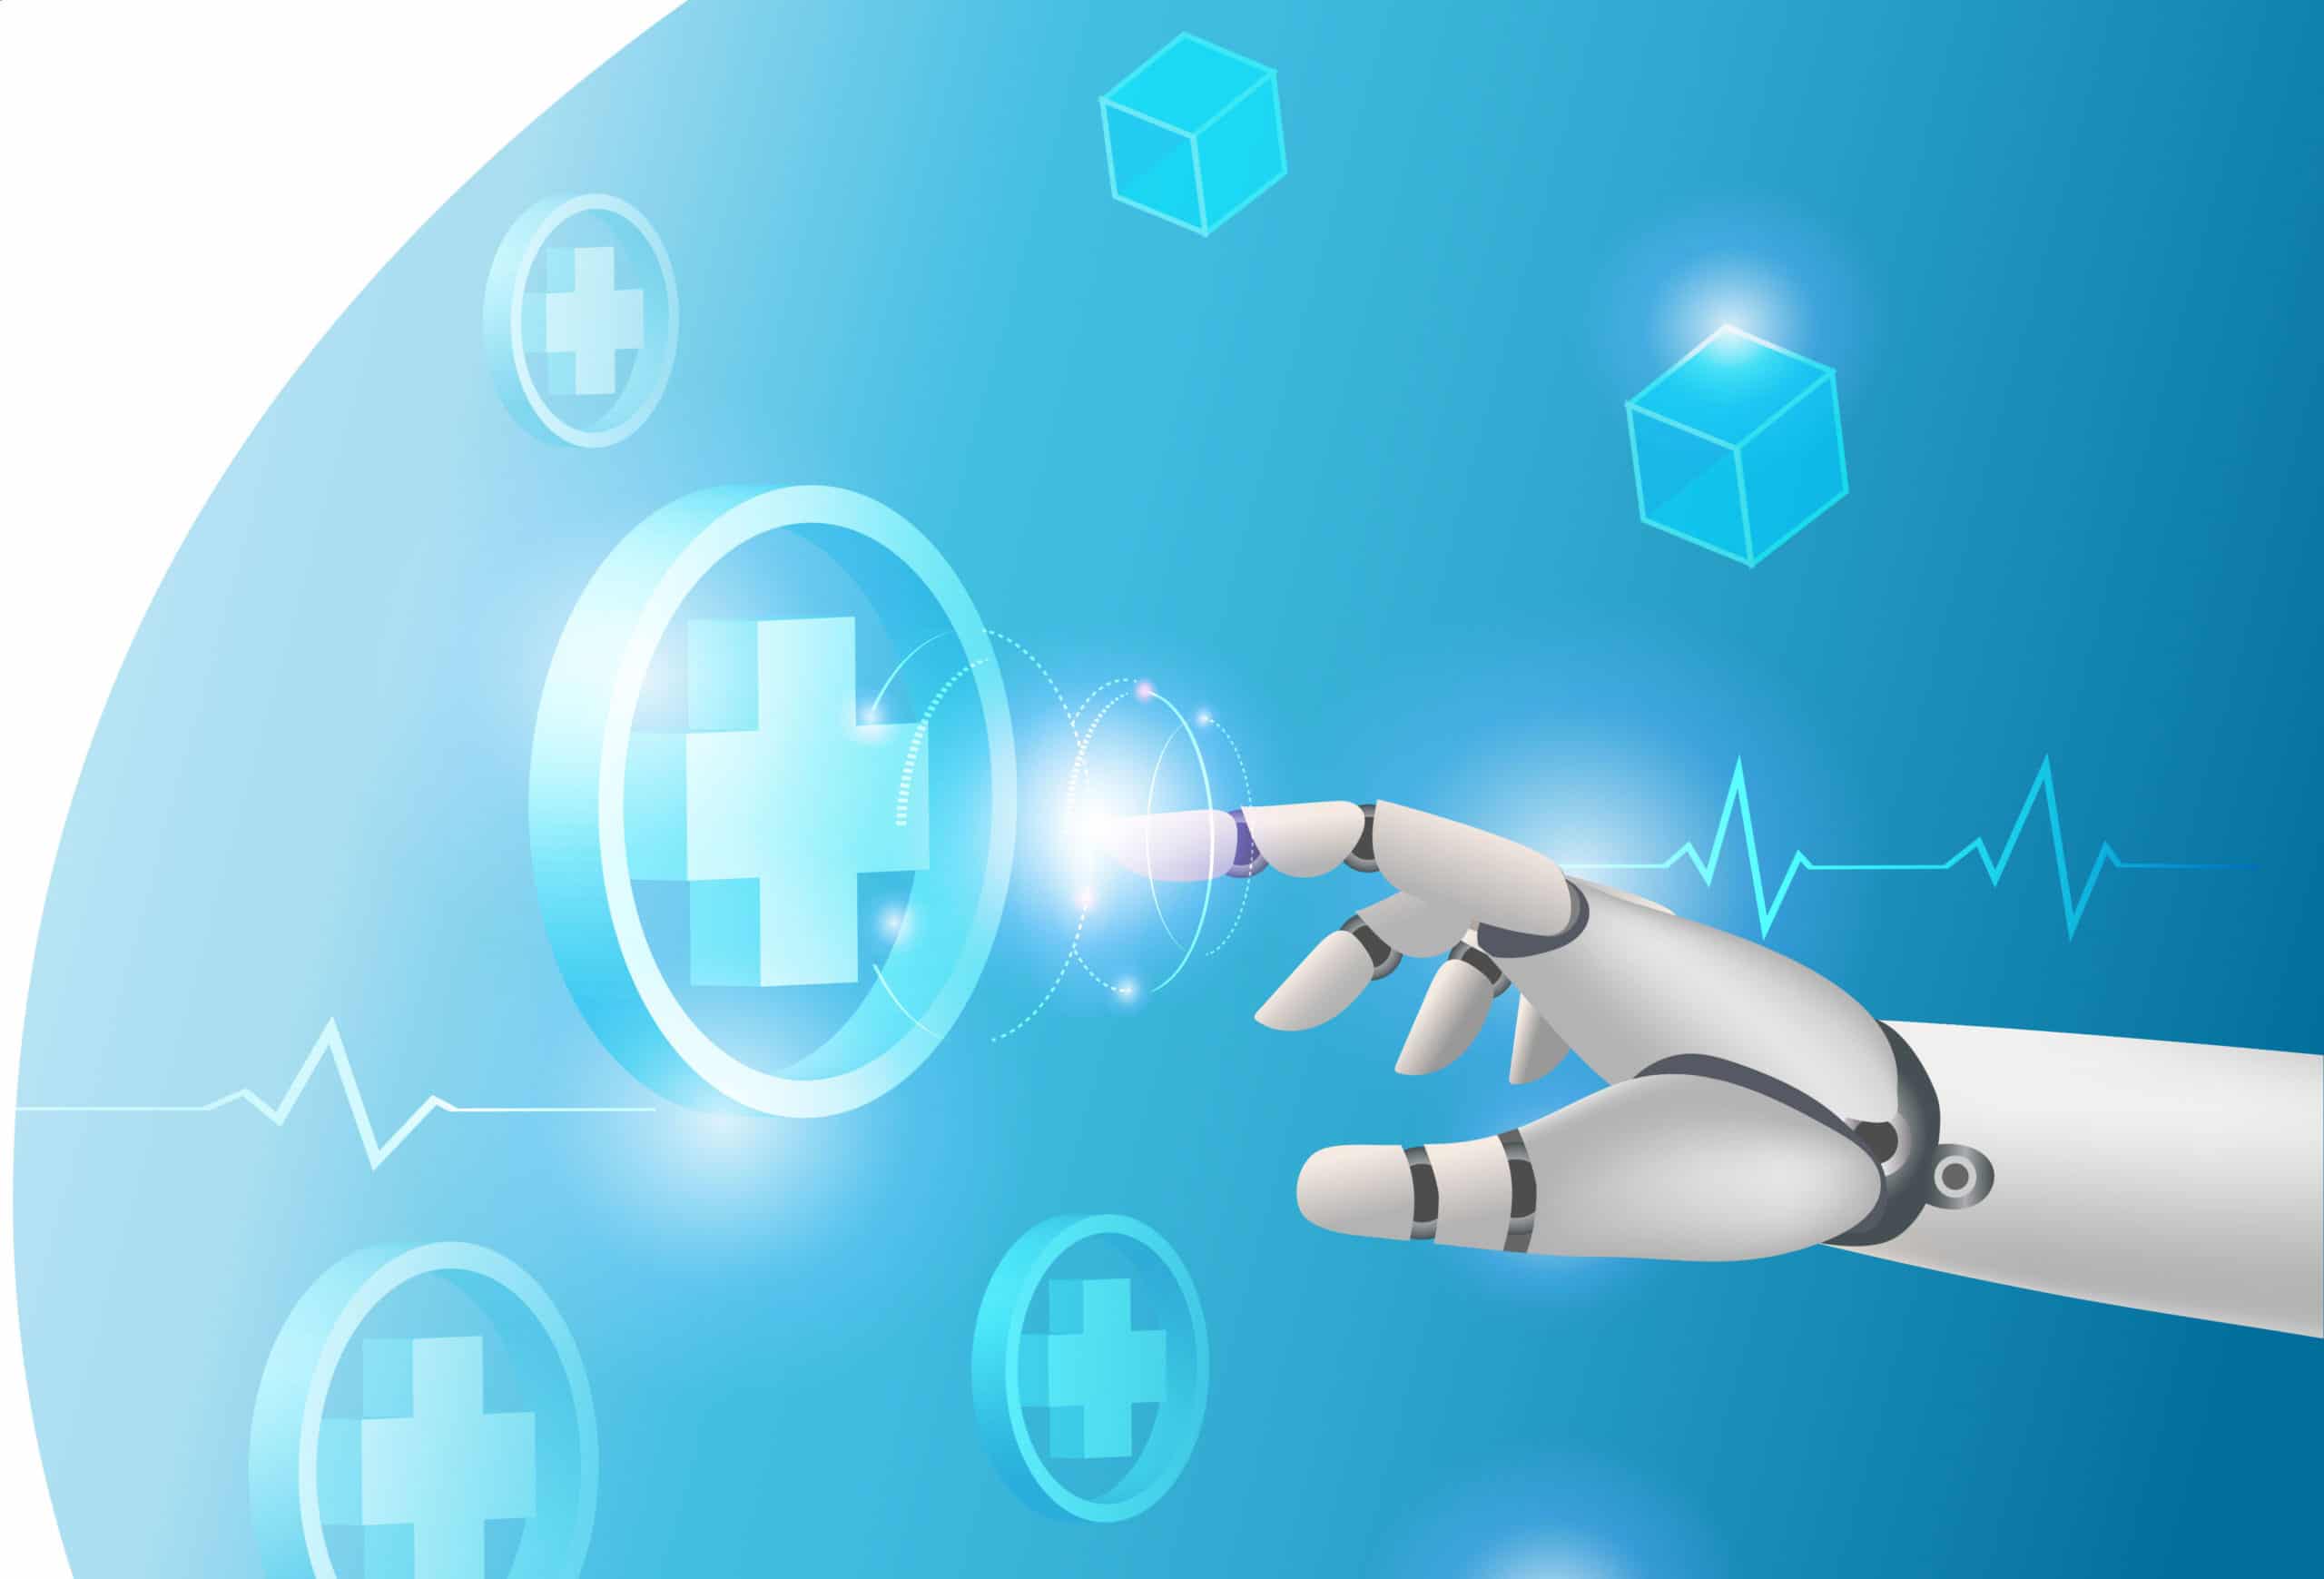 Medical robotics technology. Robot hand touching medical network connecting icon. Artificial intelligence robot assist doctor on surgery and operation in hospital.